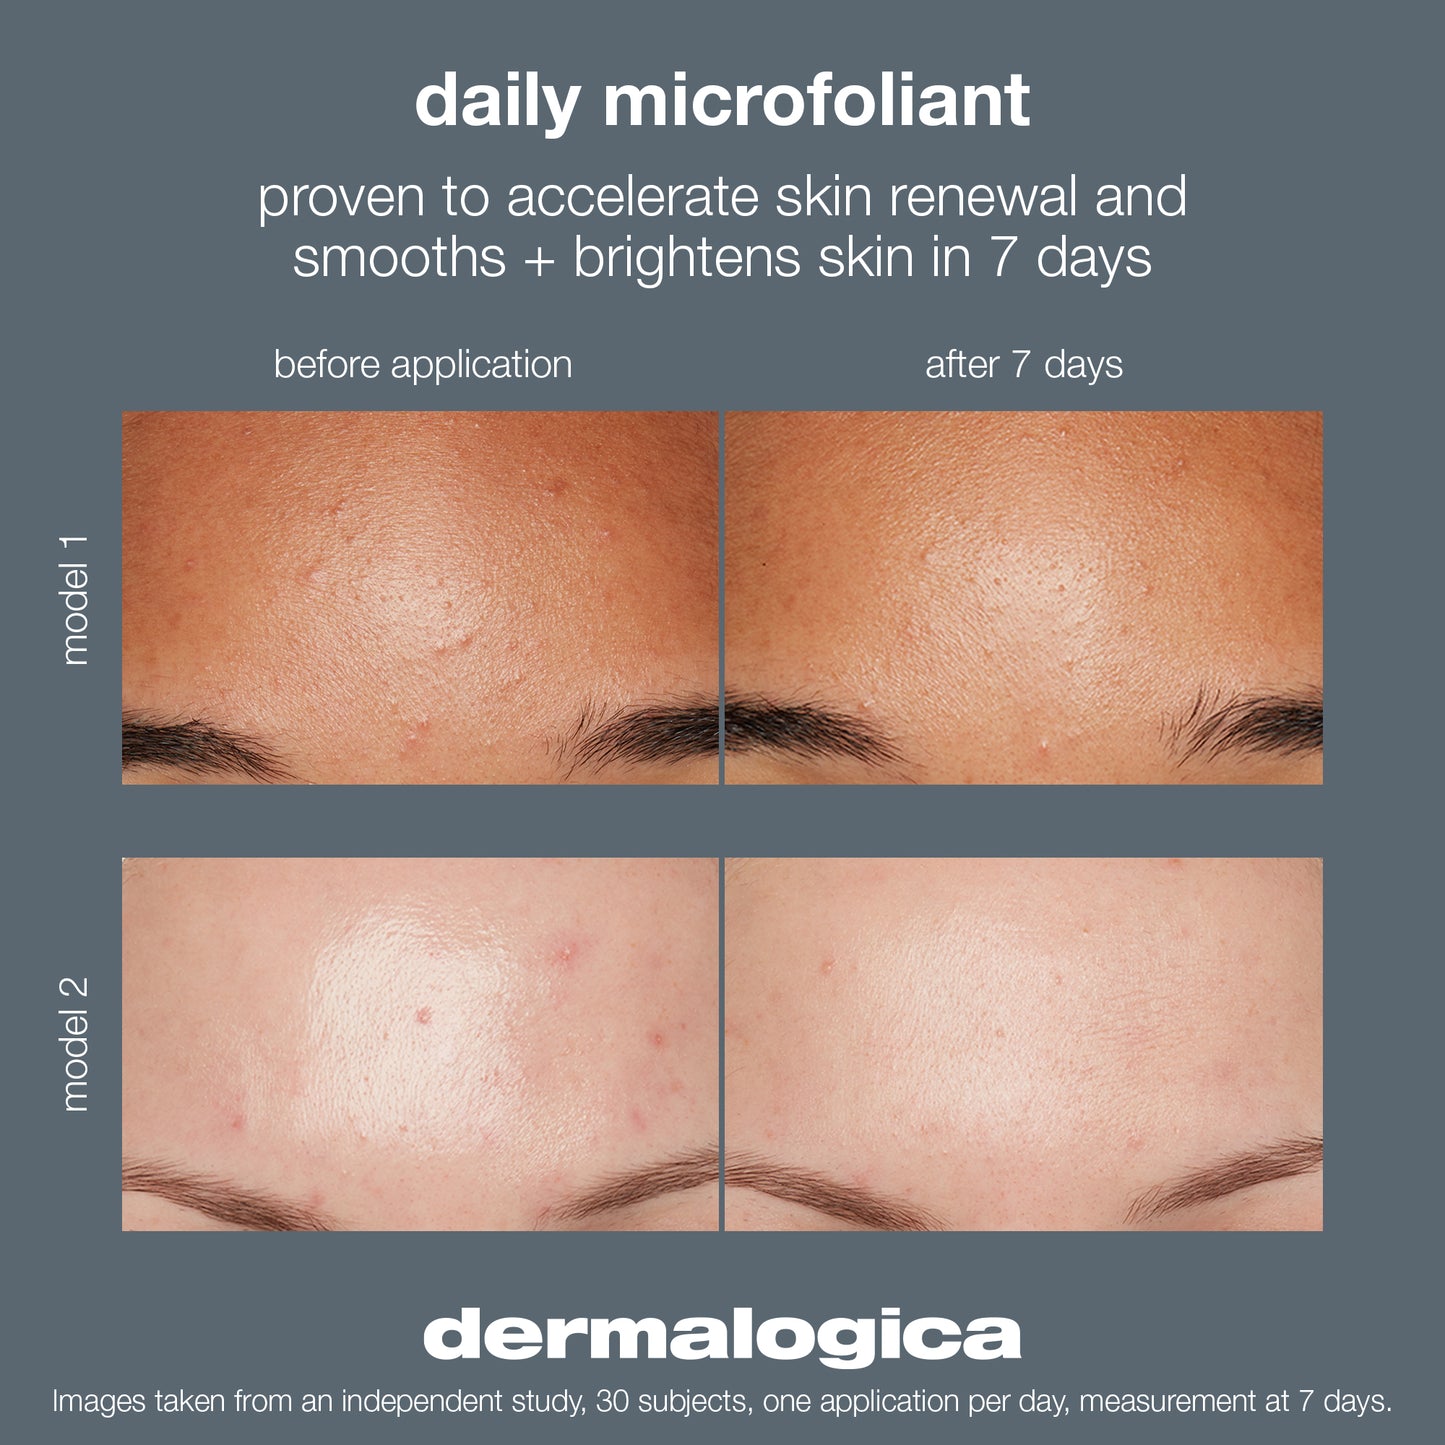 Smooth + Brighten: Daily Microfoliant (1 travel size)